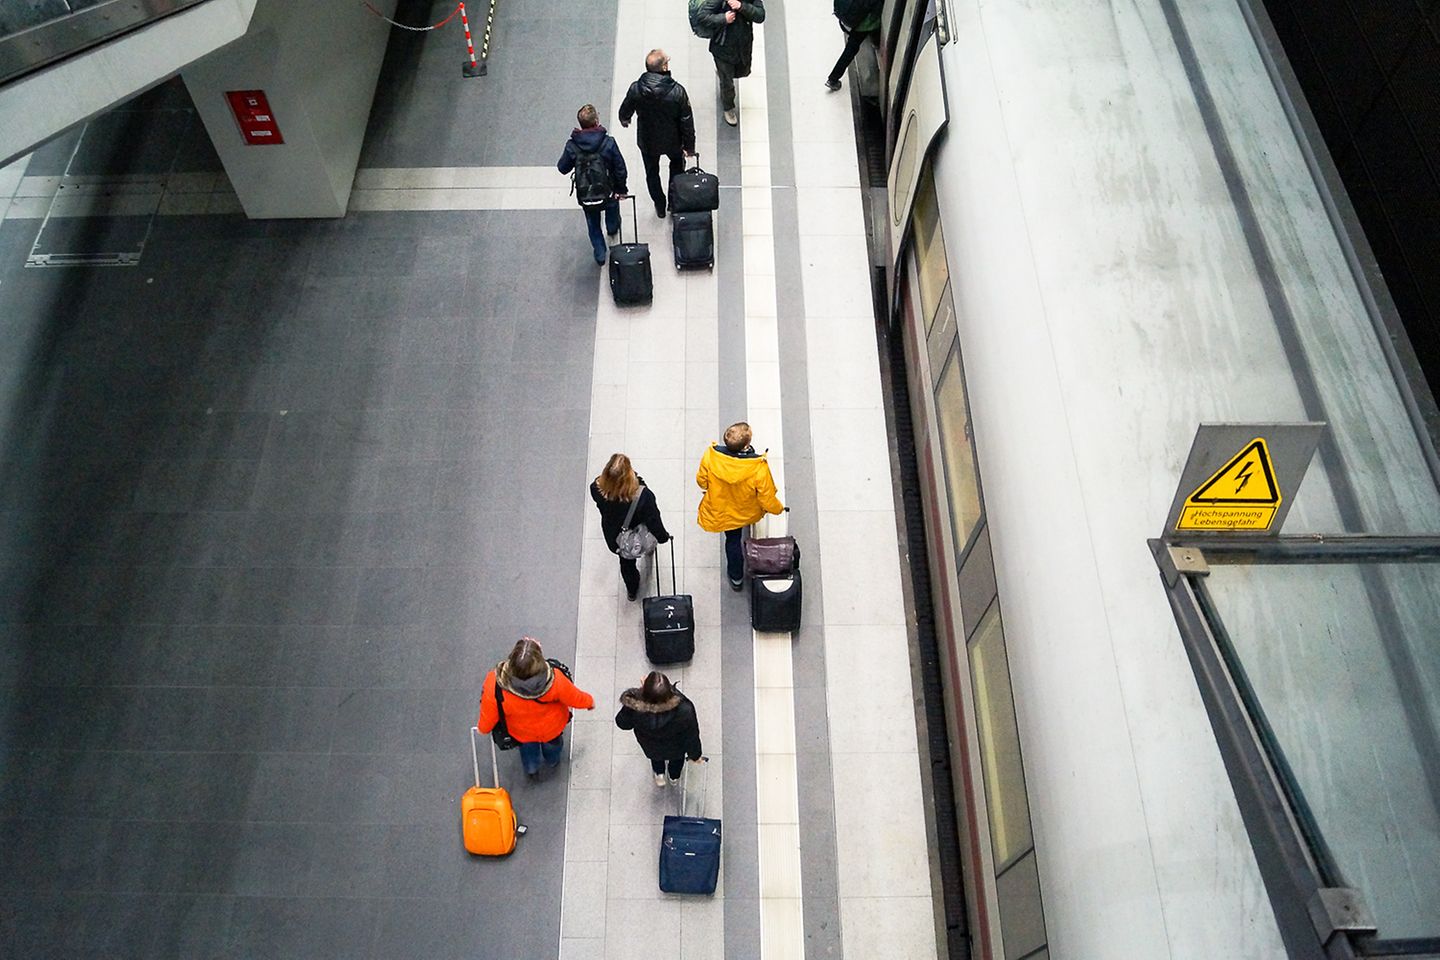 Aerial view of a platform. Travelers pull their bags along a holding train.